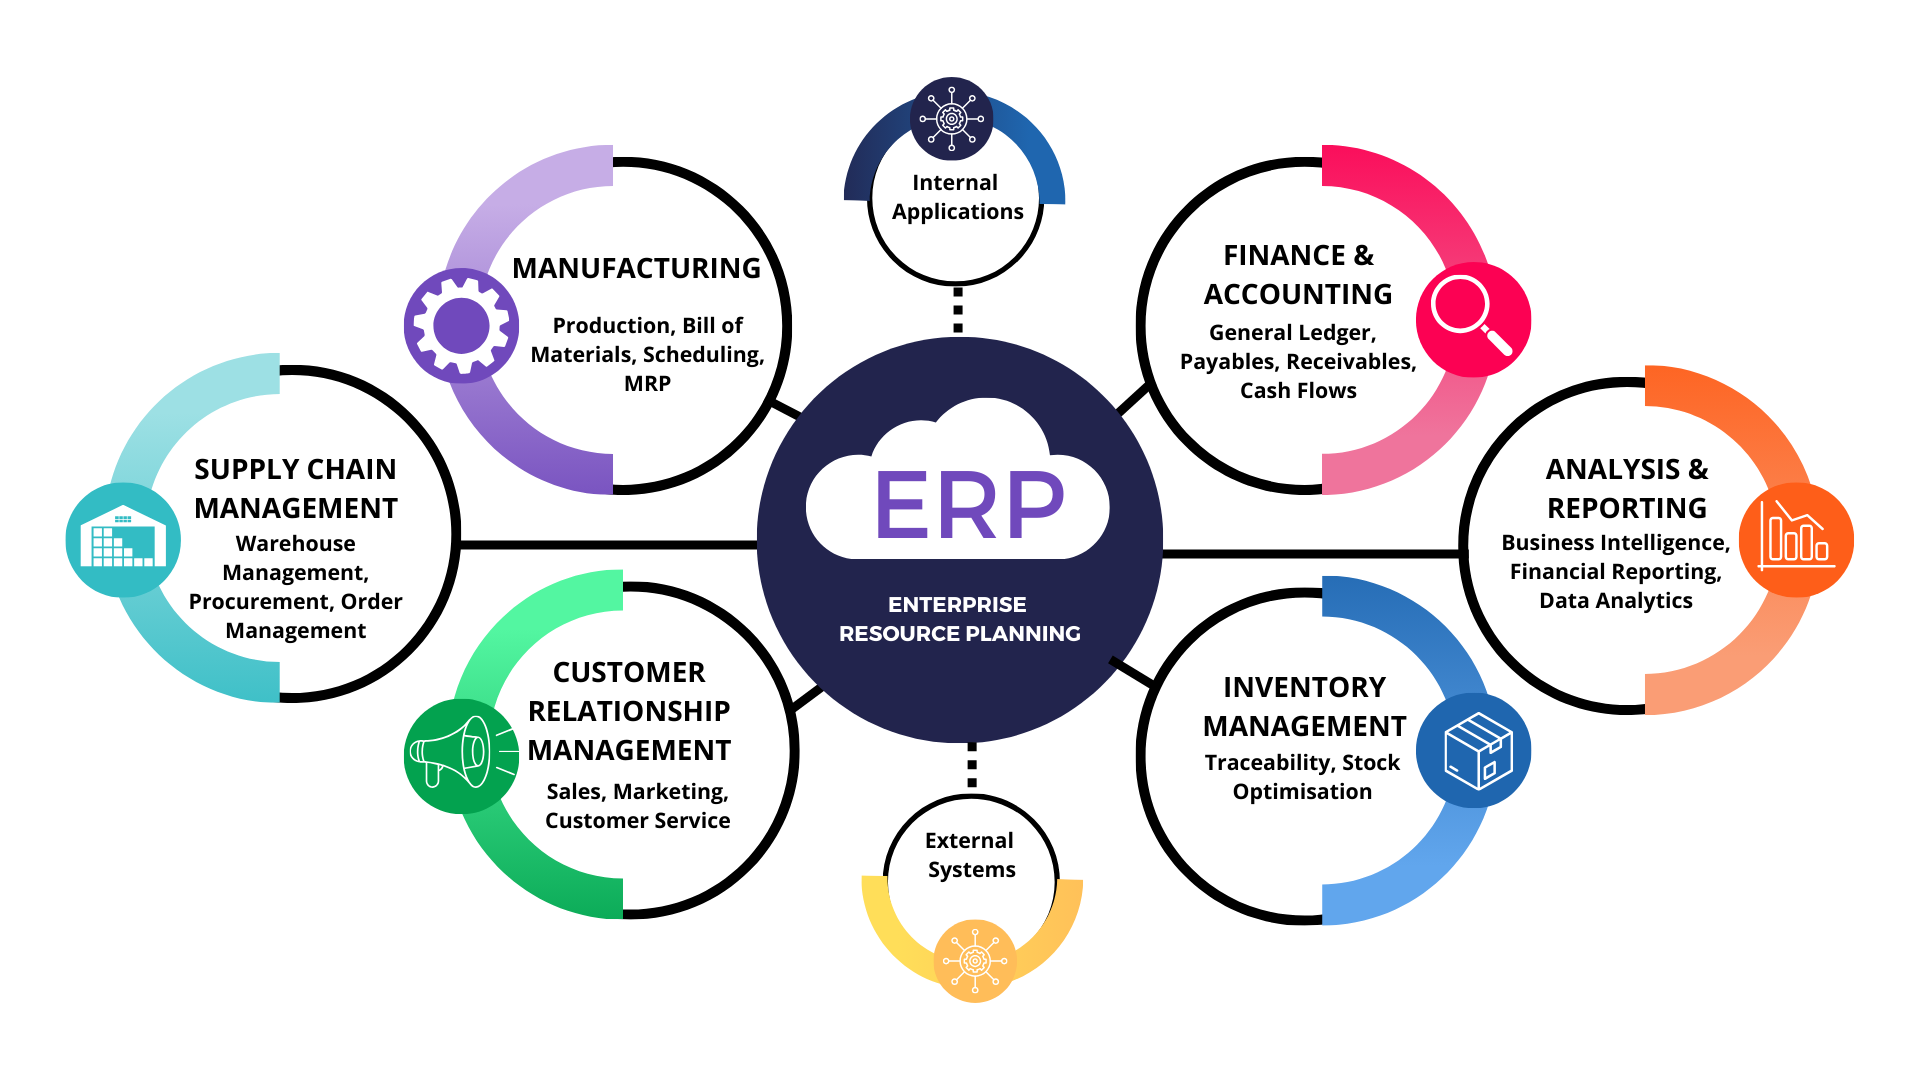 A diagram showing the components of an ERP system